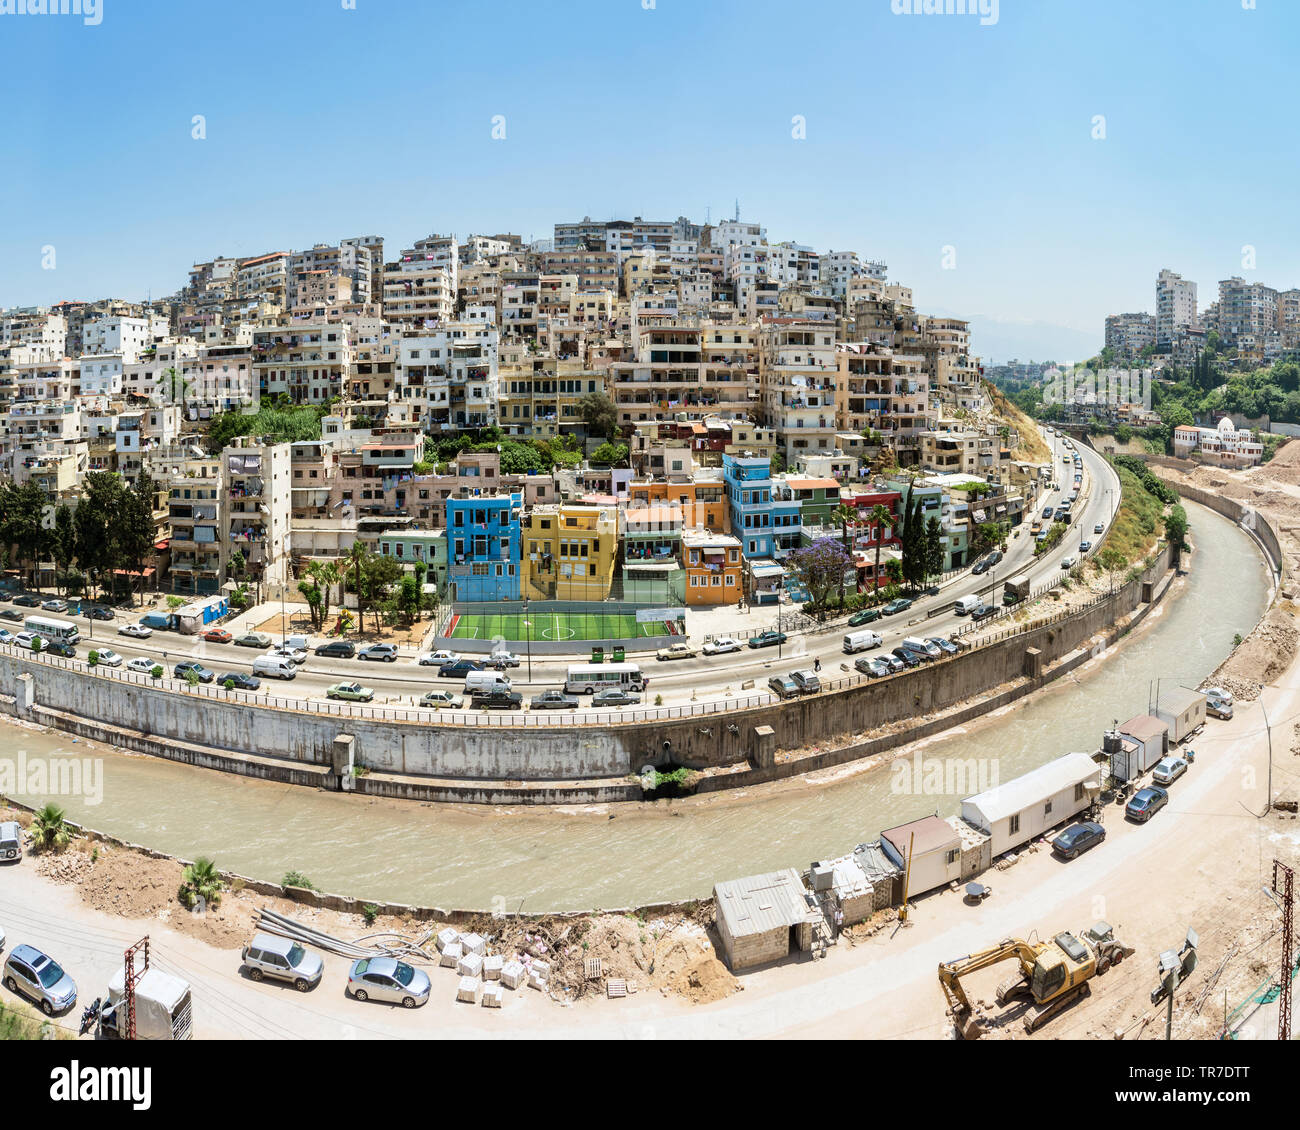 Cluster of buildings covering a small hill in Tripoli, Lebanon Stock Photo